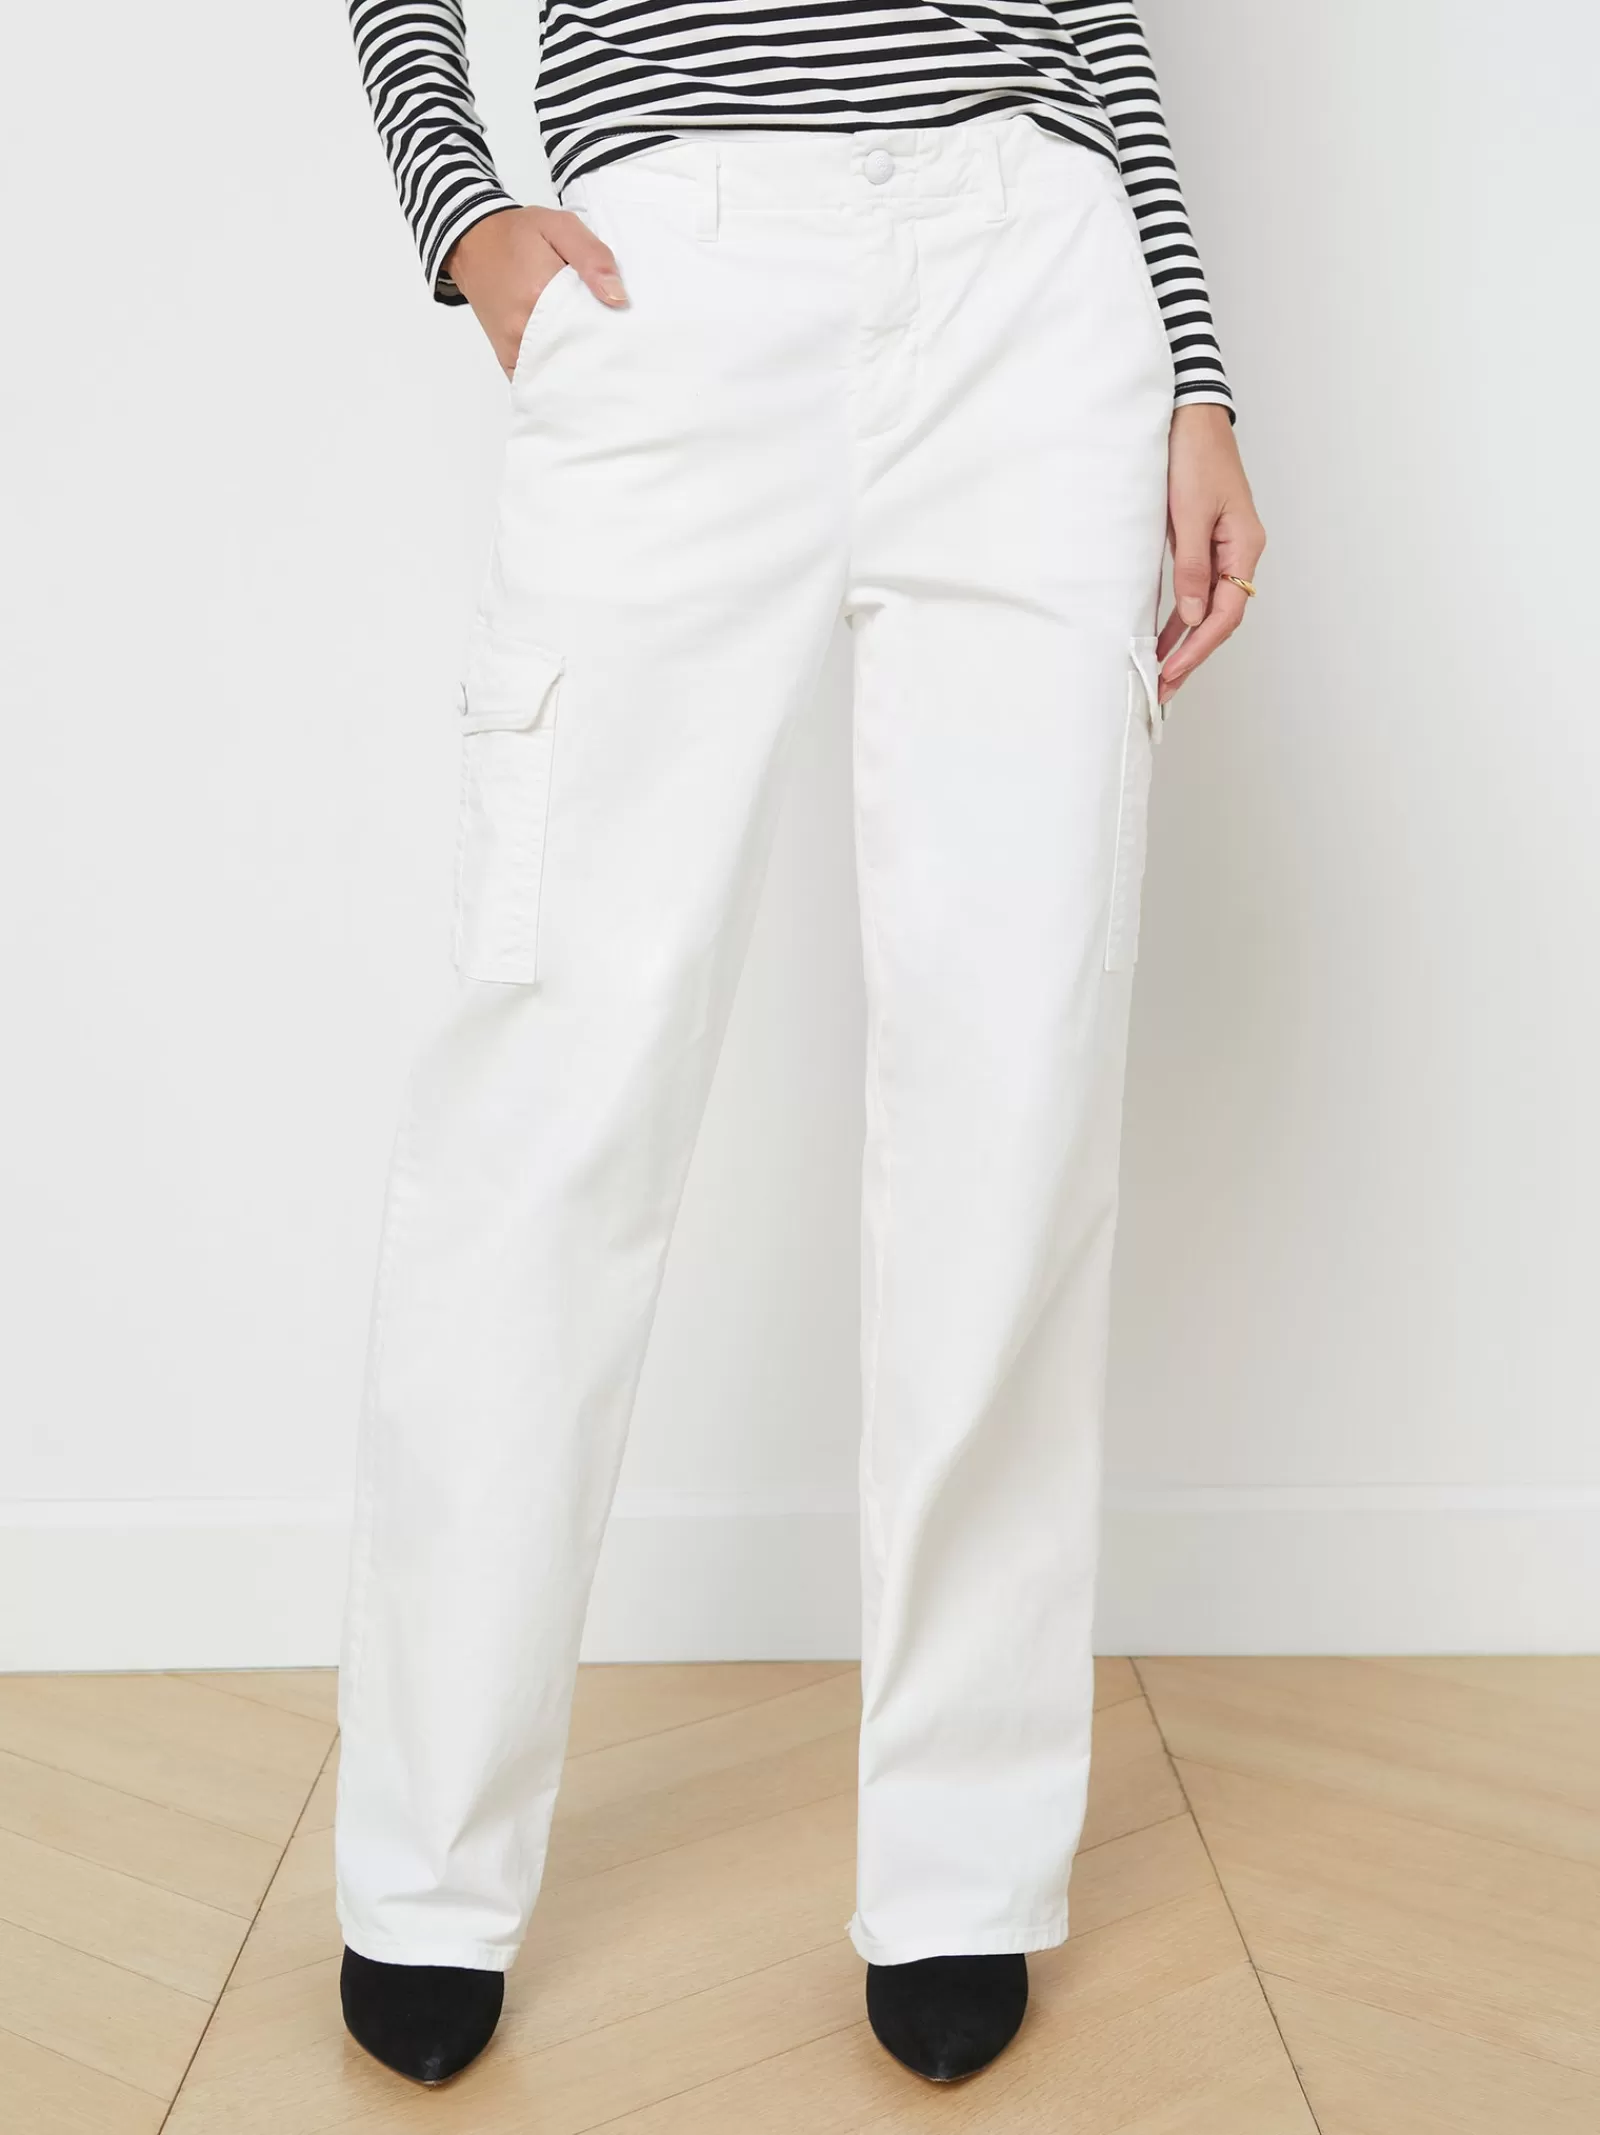 L'AGENCE Channing Trouser< Cargo Pants | Cargo Pants